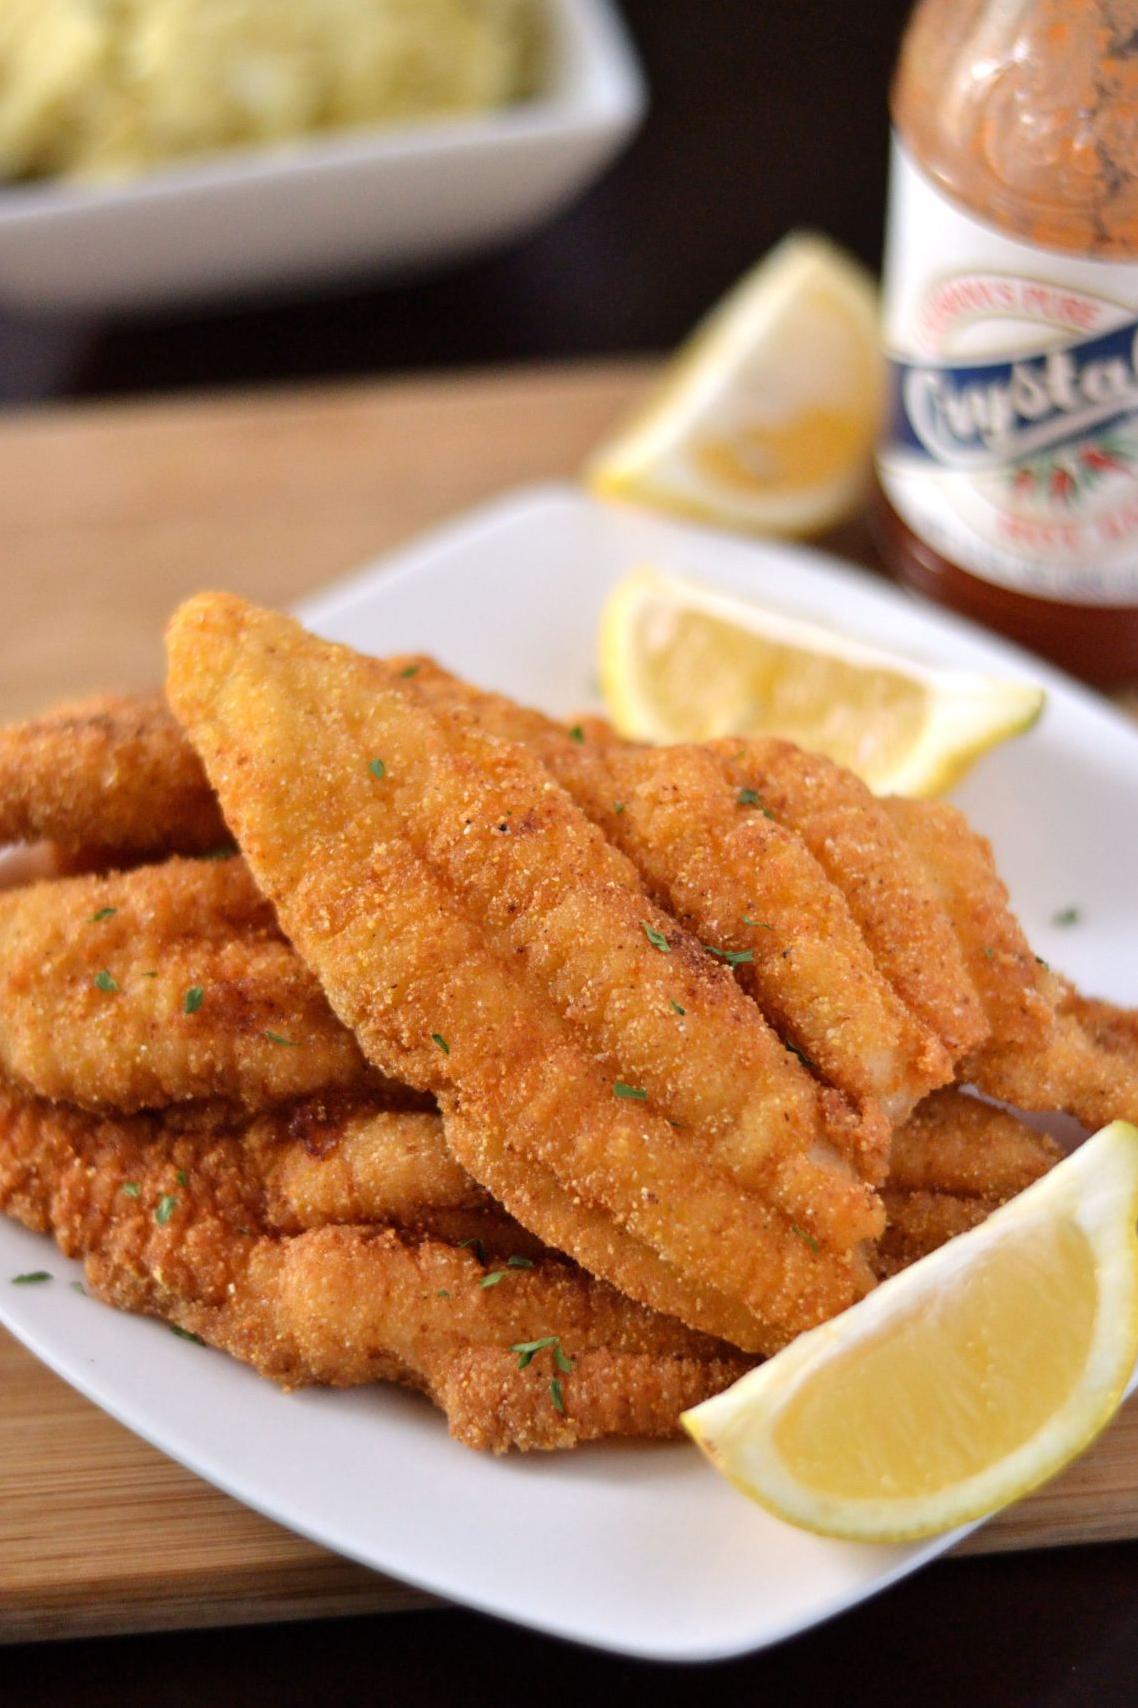  A perfectly cooked fillet of catfish - crispy on the outside, juicy on the inside.